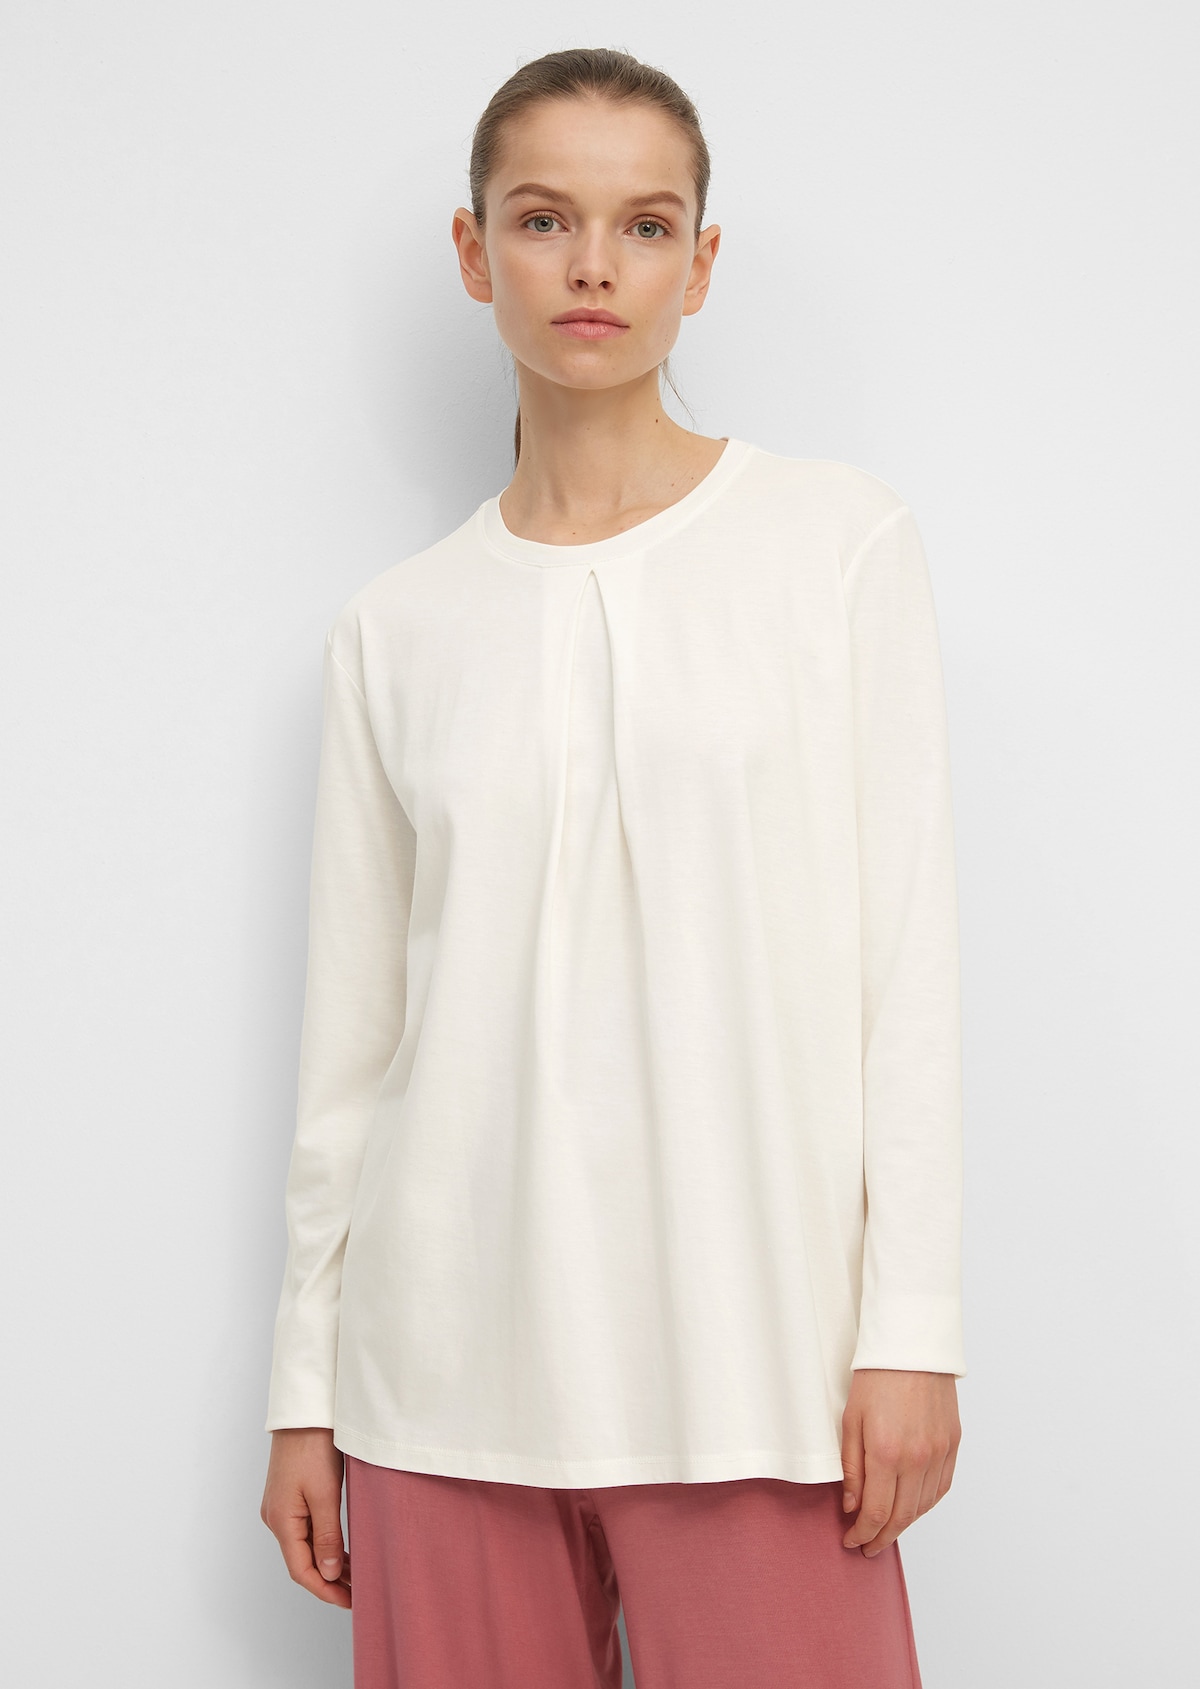 Loungewear top with an inverted pleat - white | CLOTHING | MARC O’POLO